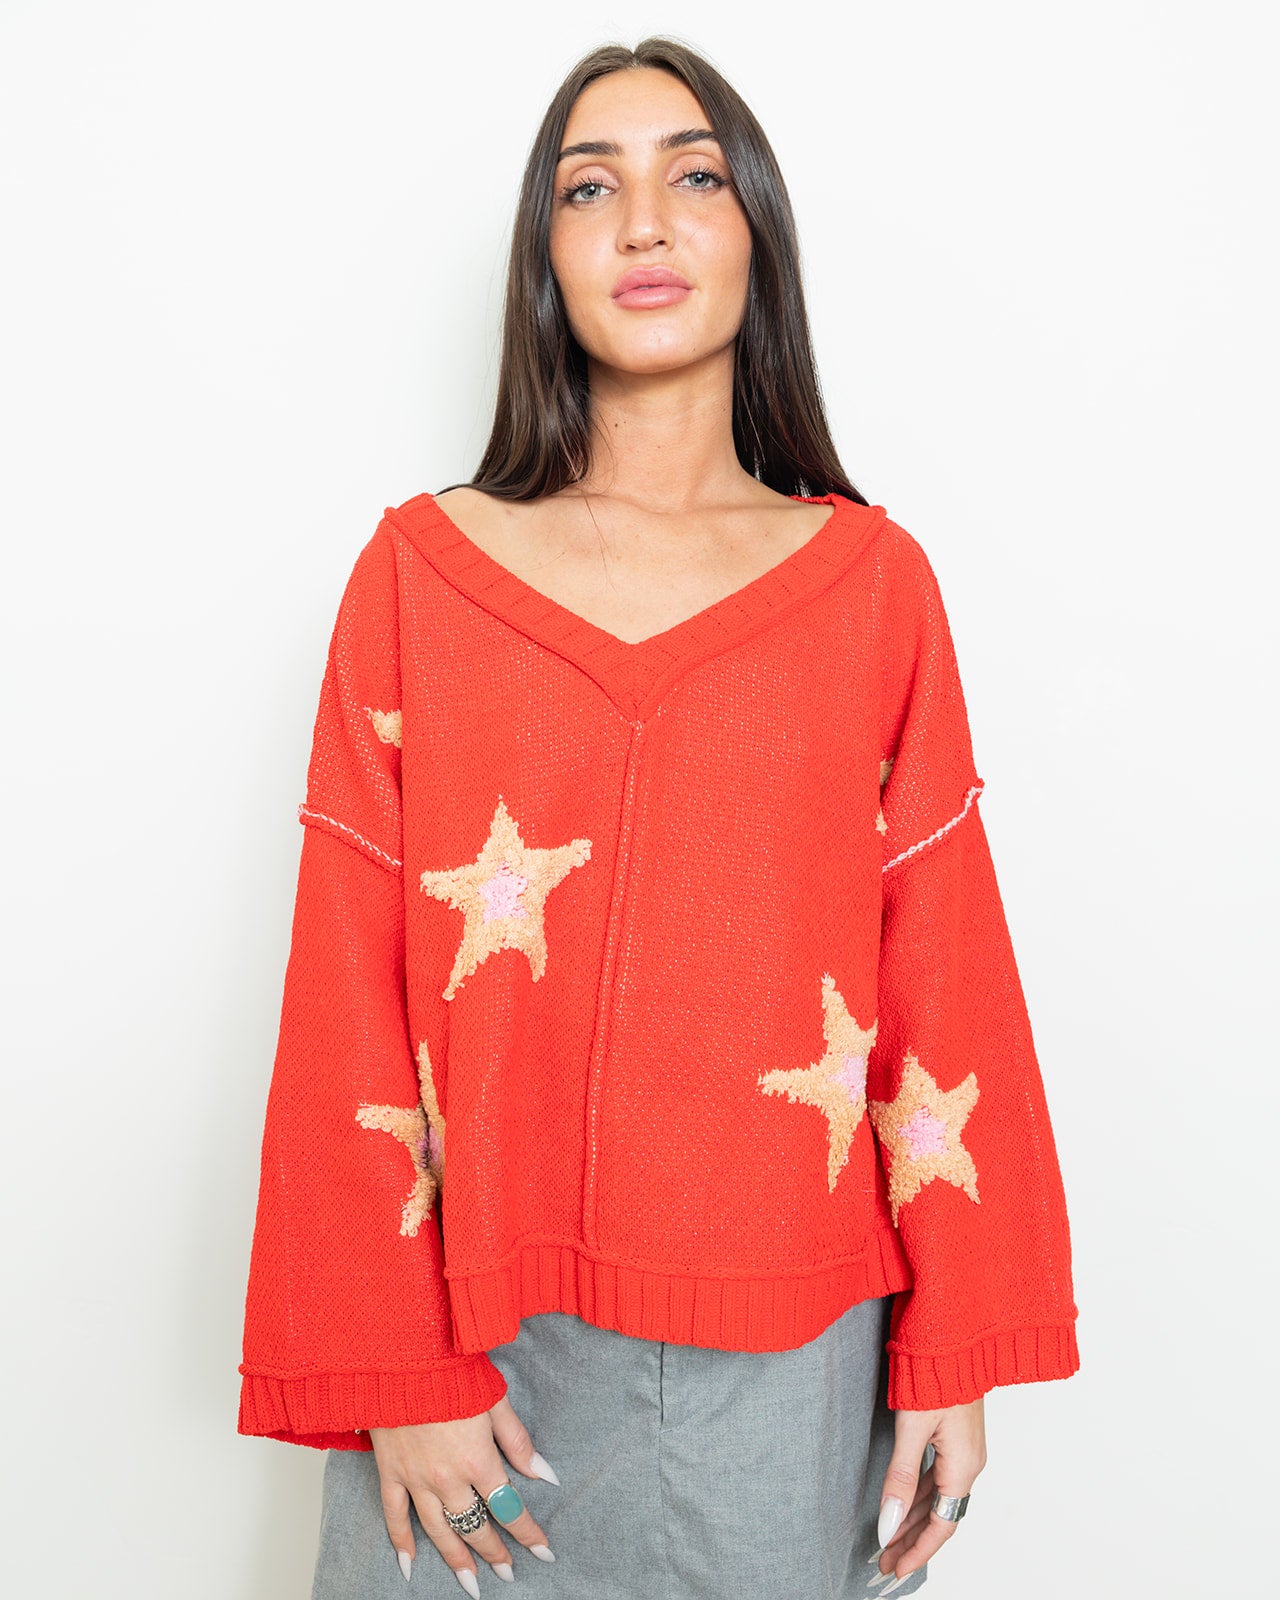 Riot Candy Apple Sweater